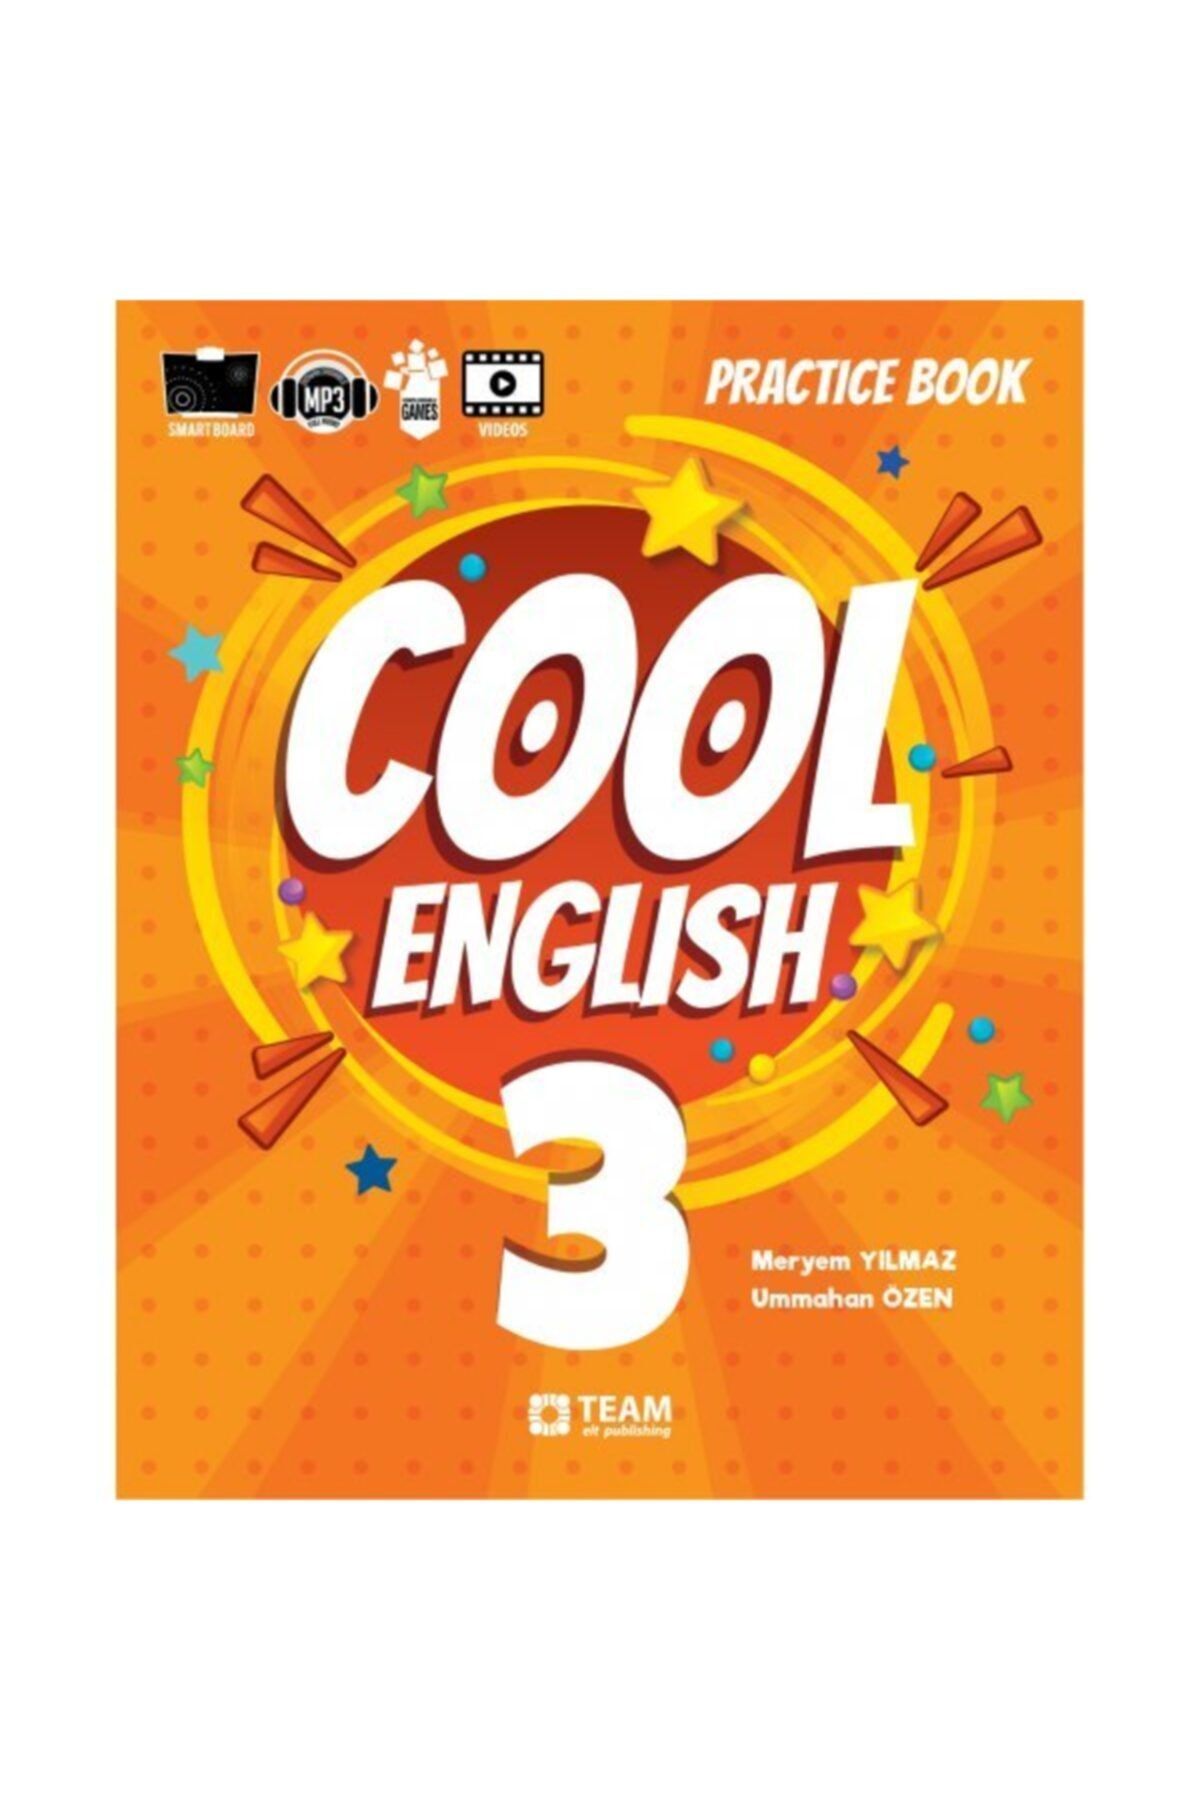 Friends 3 test book. Cool English 4 activity book. Cool English 5 activity book. Practice book 3.